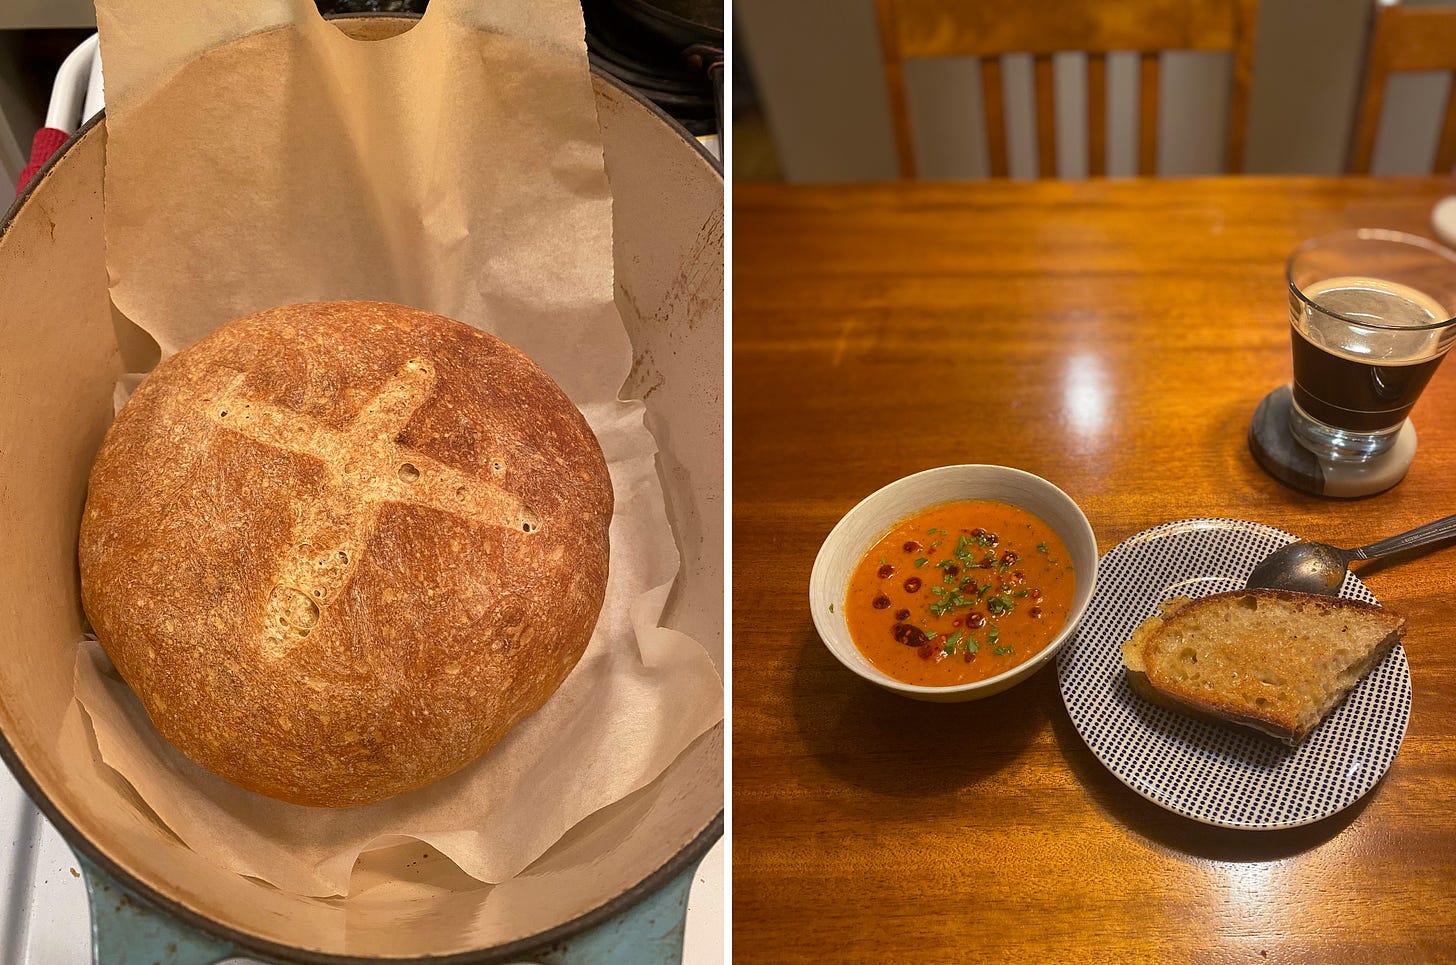 Left image: a sourdough boule with a cross cut into the top, still on its parchment in a dutch oven. Right image: a small bowl of tomato soup garnished with parsley and chili oil, next to a small blue and white plate with a grilled cheese sandwich. A spoon rests on the edge of the plate, and a glass of dark beer is on a coaster just above it.